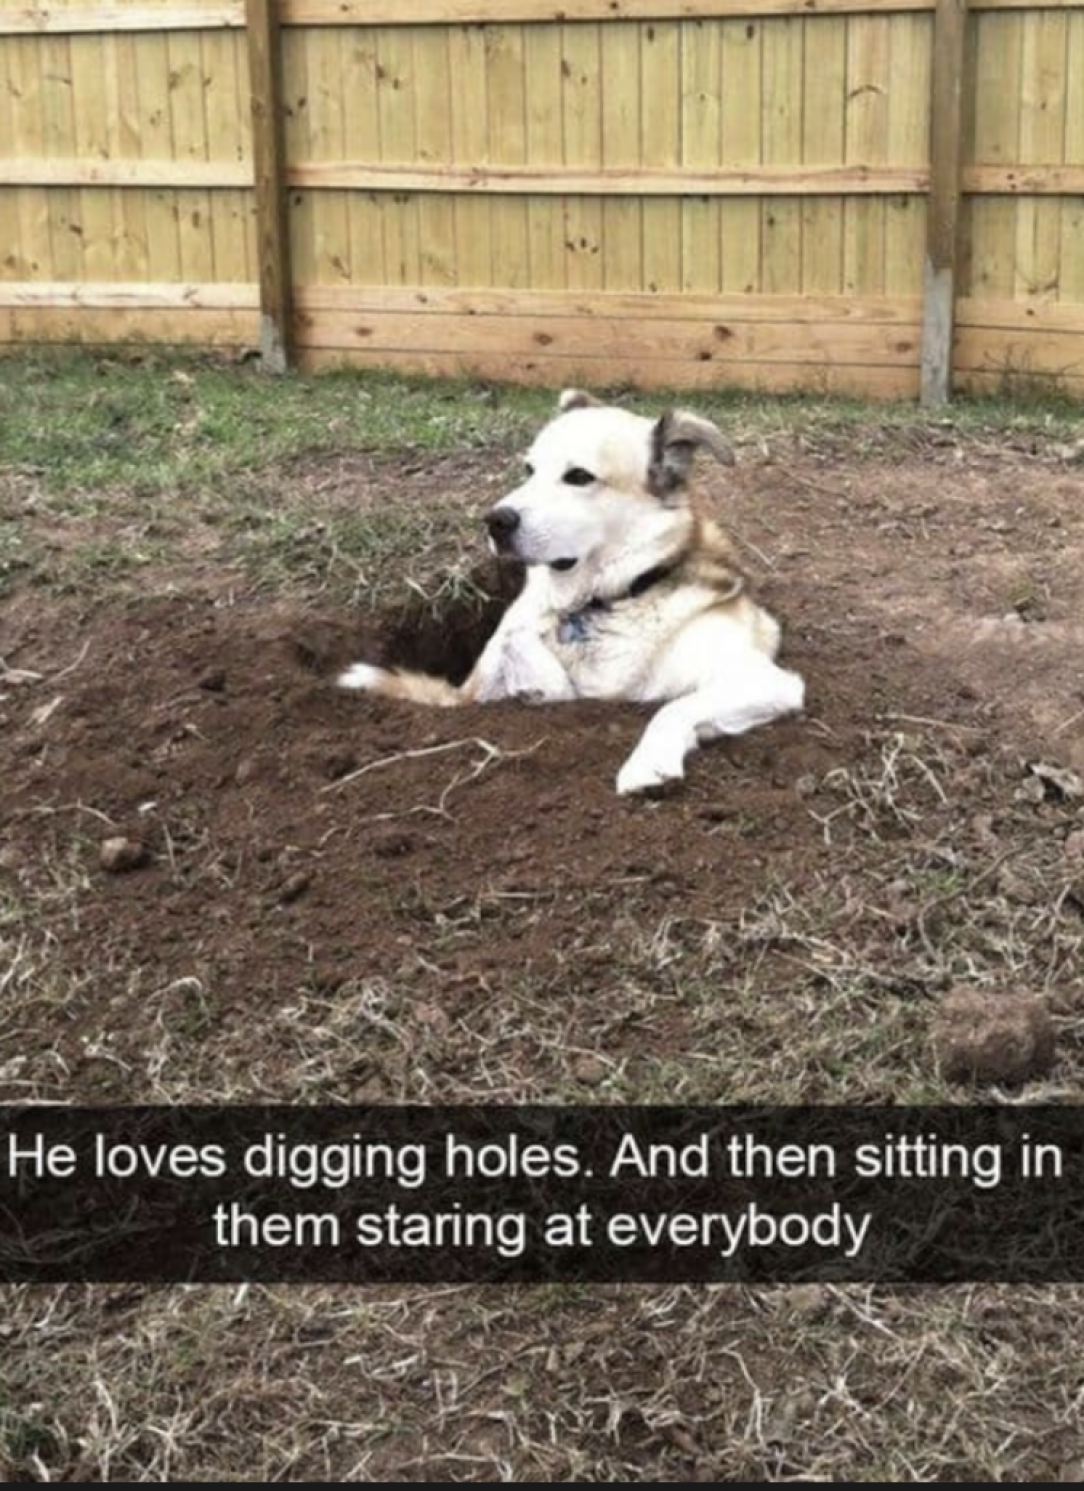 Dog, maker of hole, observer from the hole